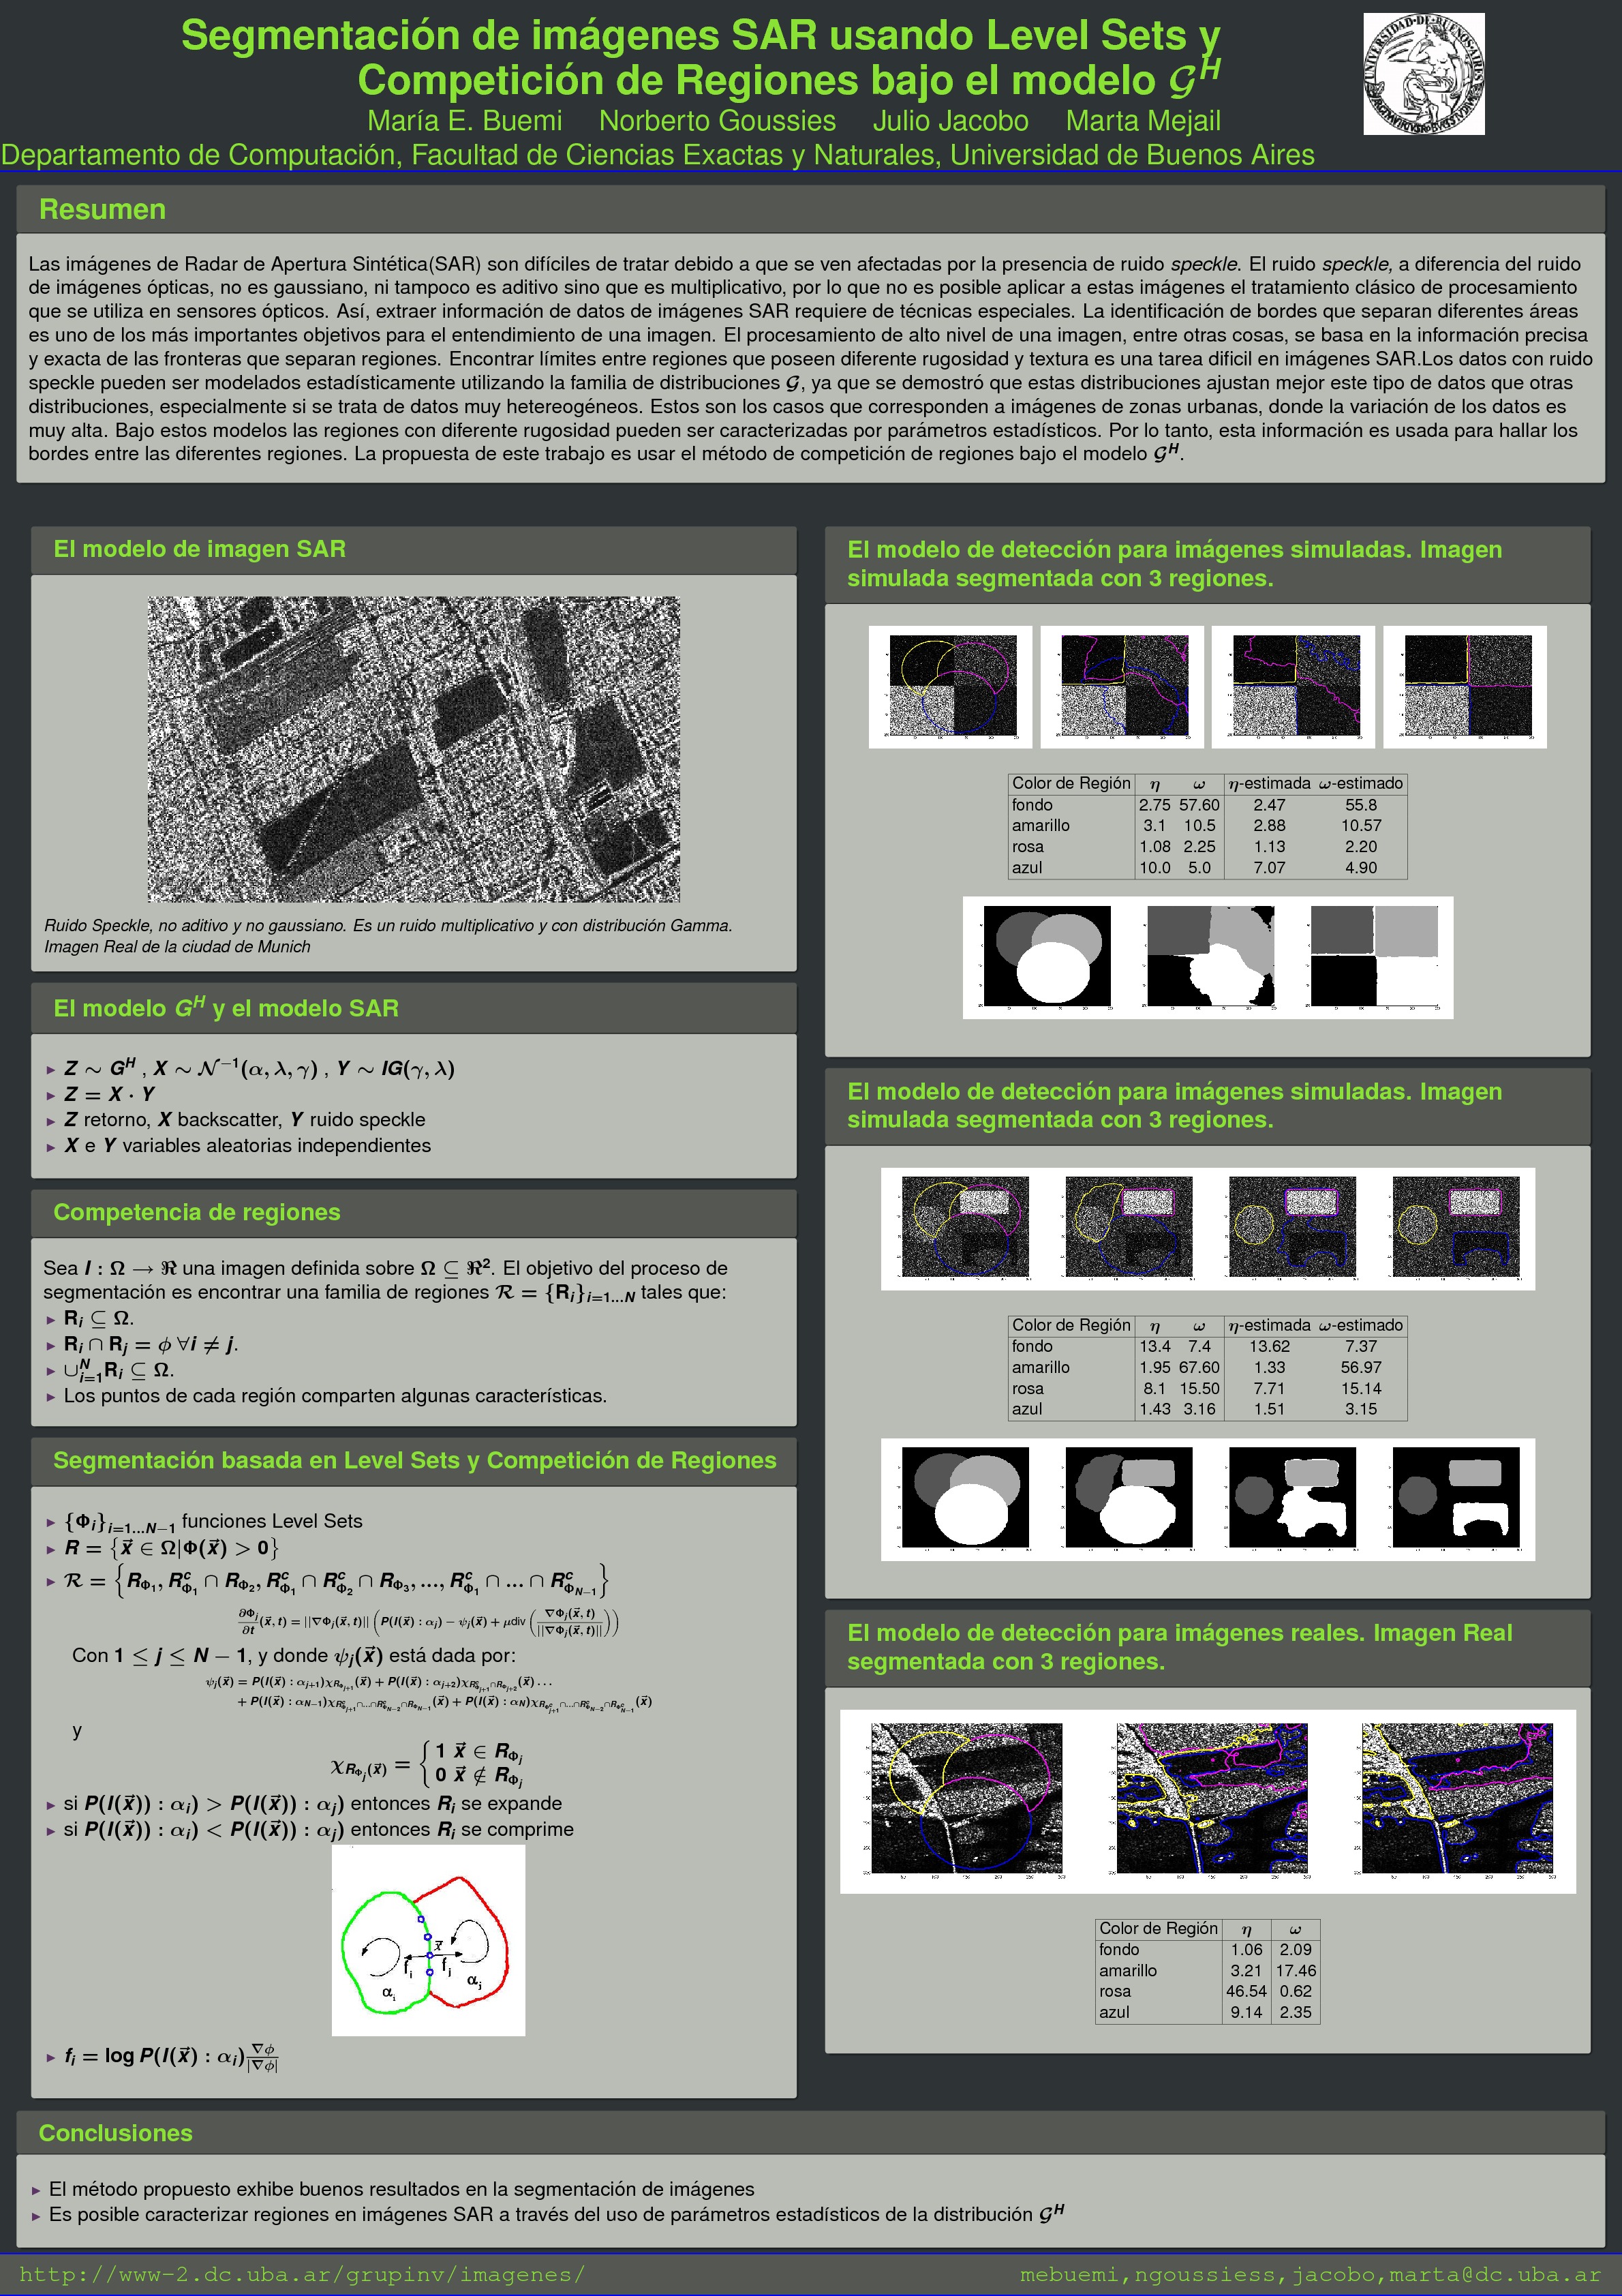 SAR image segmentation using level sets and region competition under the GH model